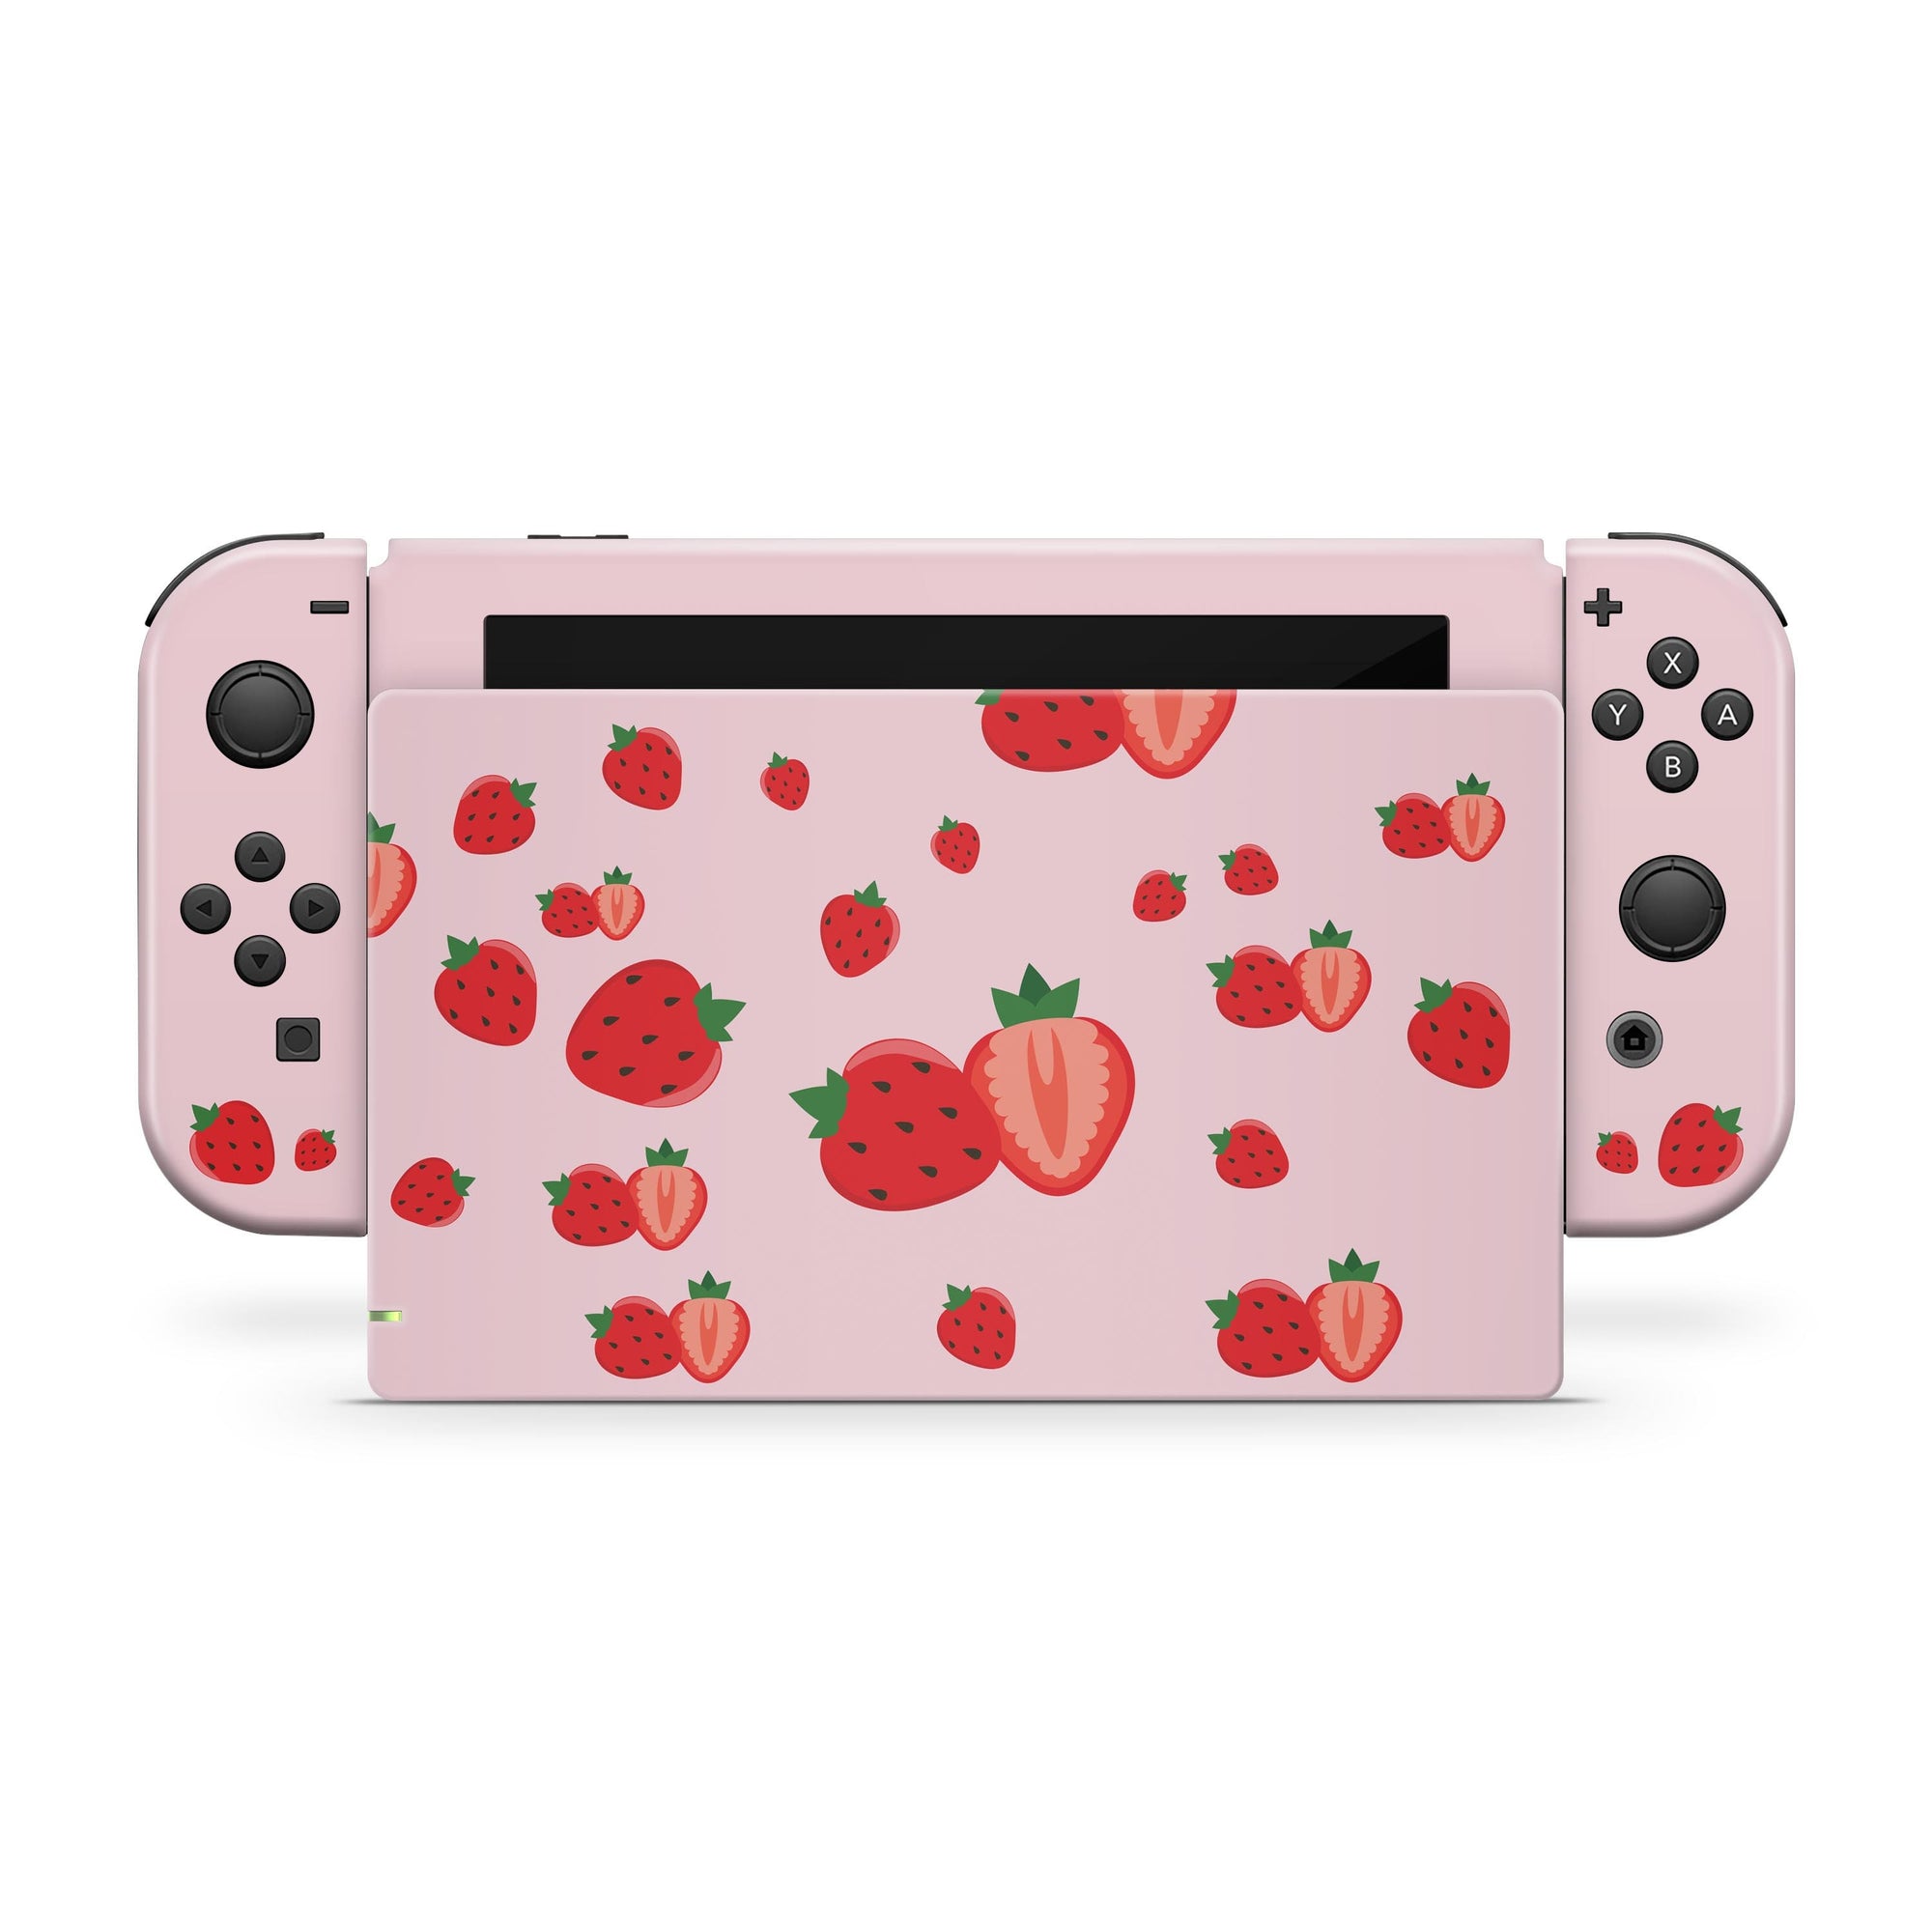 Cute strawberry nintendo switches skin ,Pink switch skin Full cover 3m